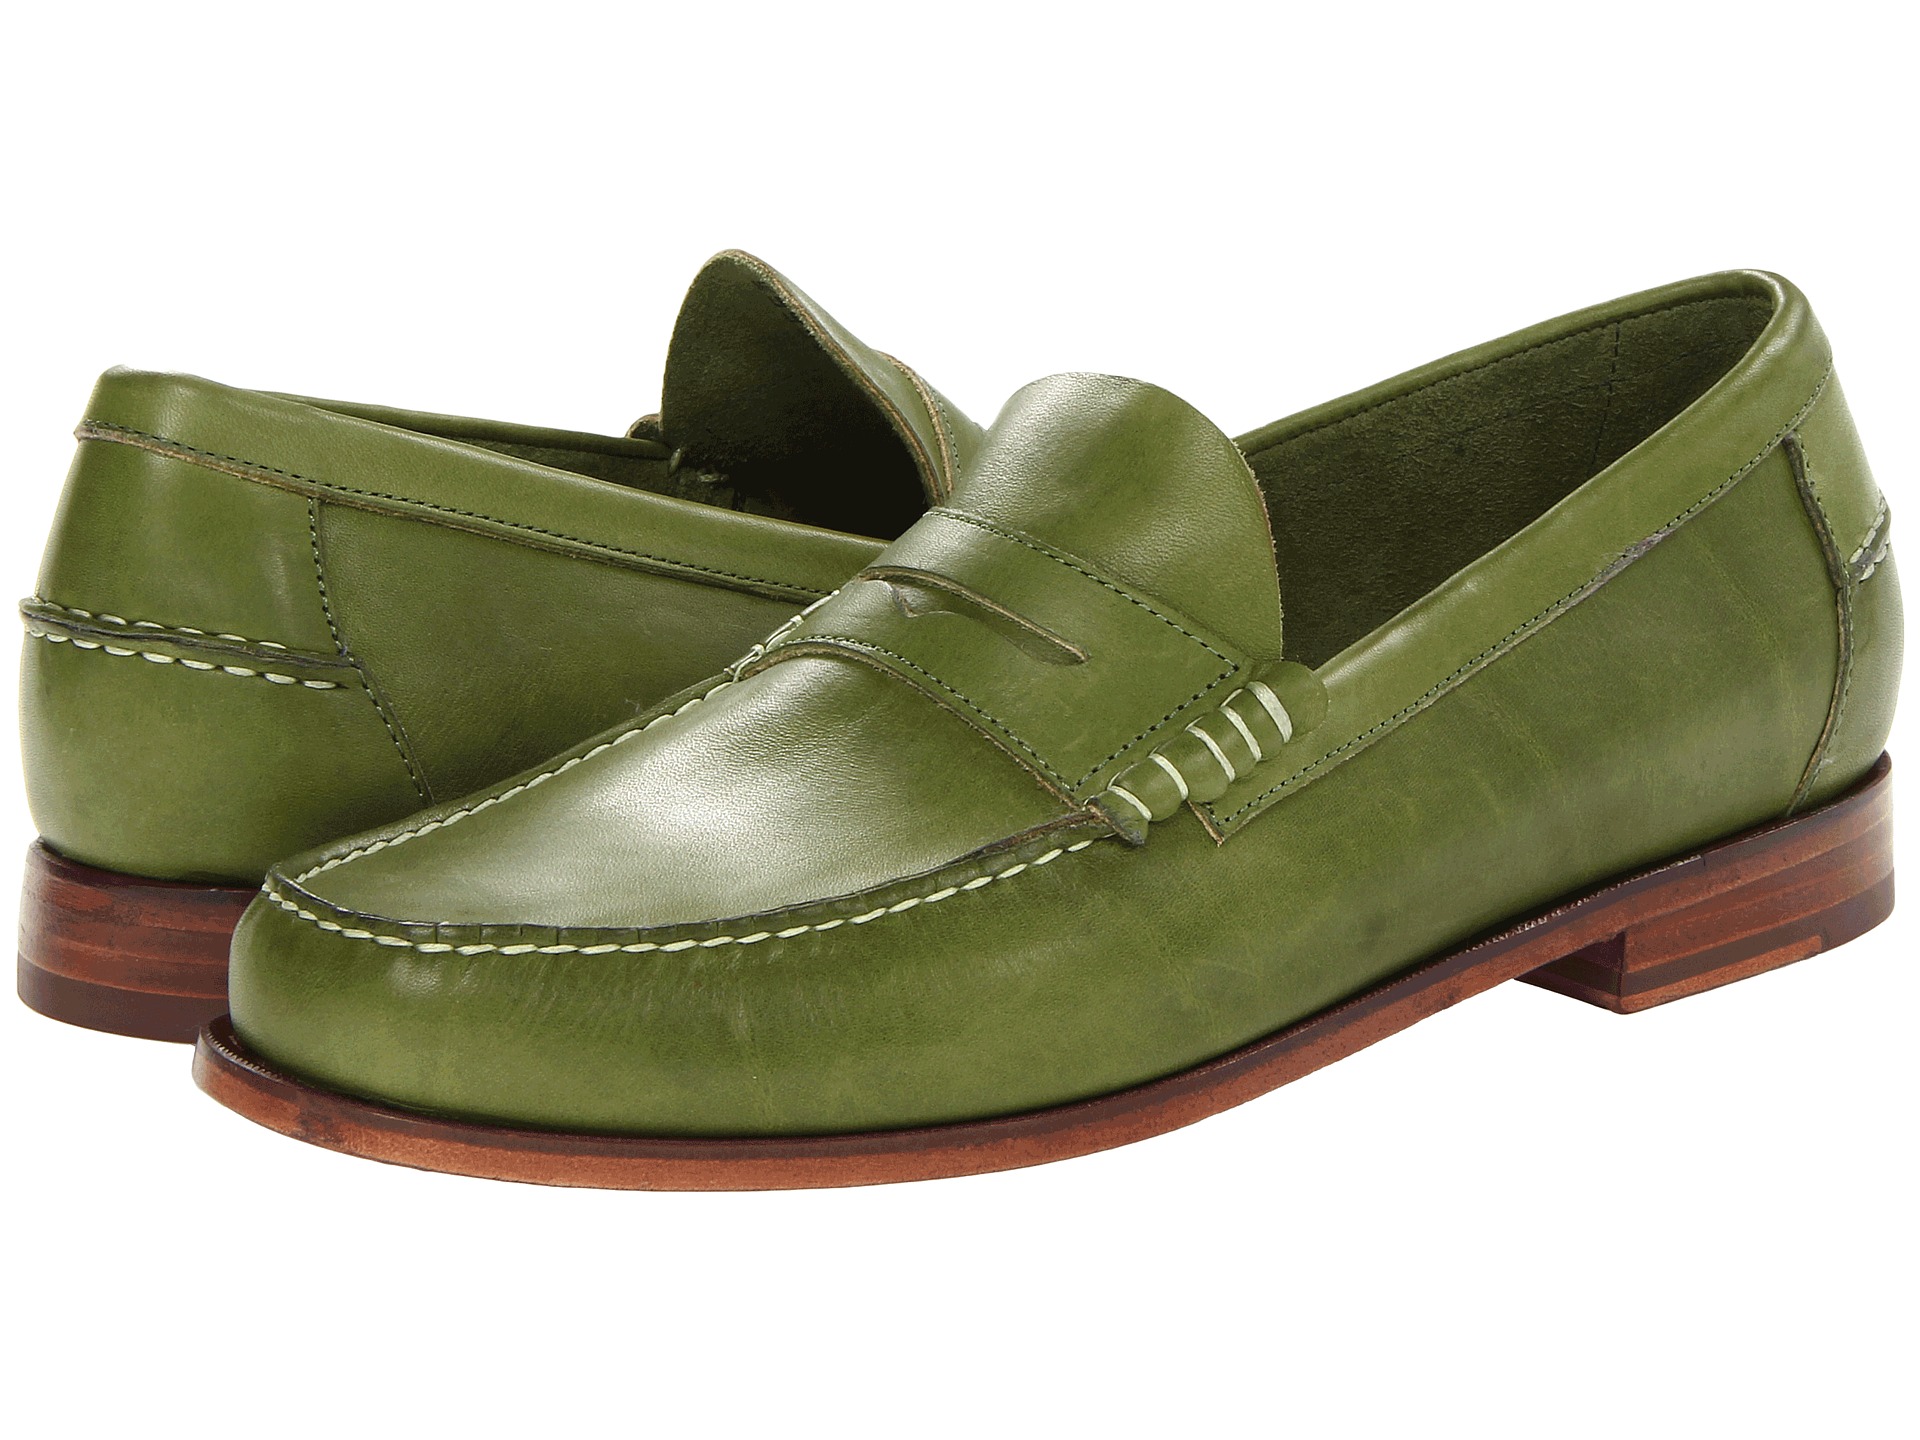 ... By Duckie Brown Penny Loafer Avocado | Shipped Free at Zappos